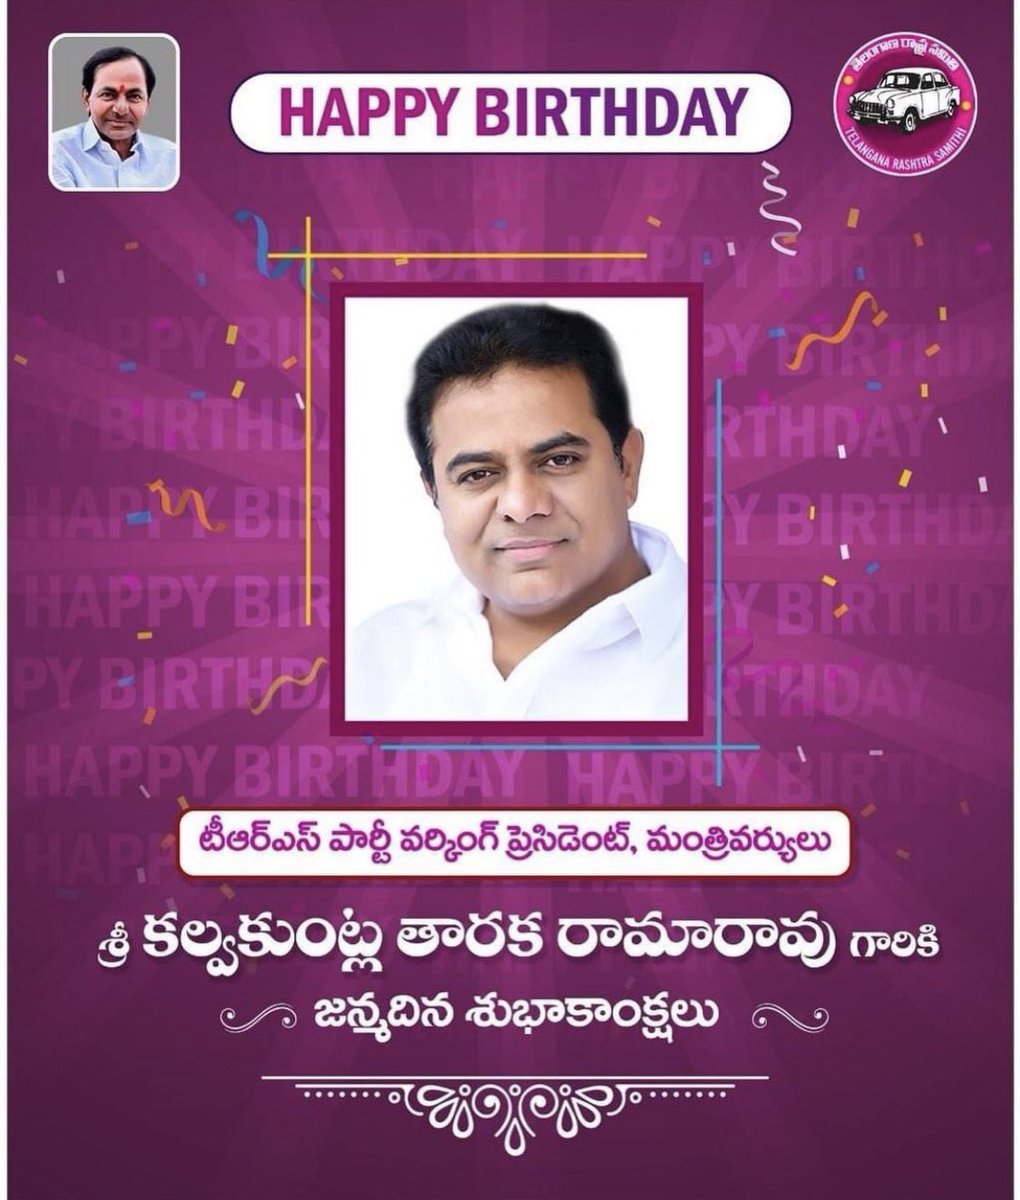 Many many happy returns of the day to the most enthusiastic and passionate leader of telangana. hope you have an amazing year ahead sir 🙏@KTRTRS